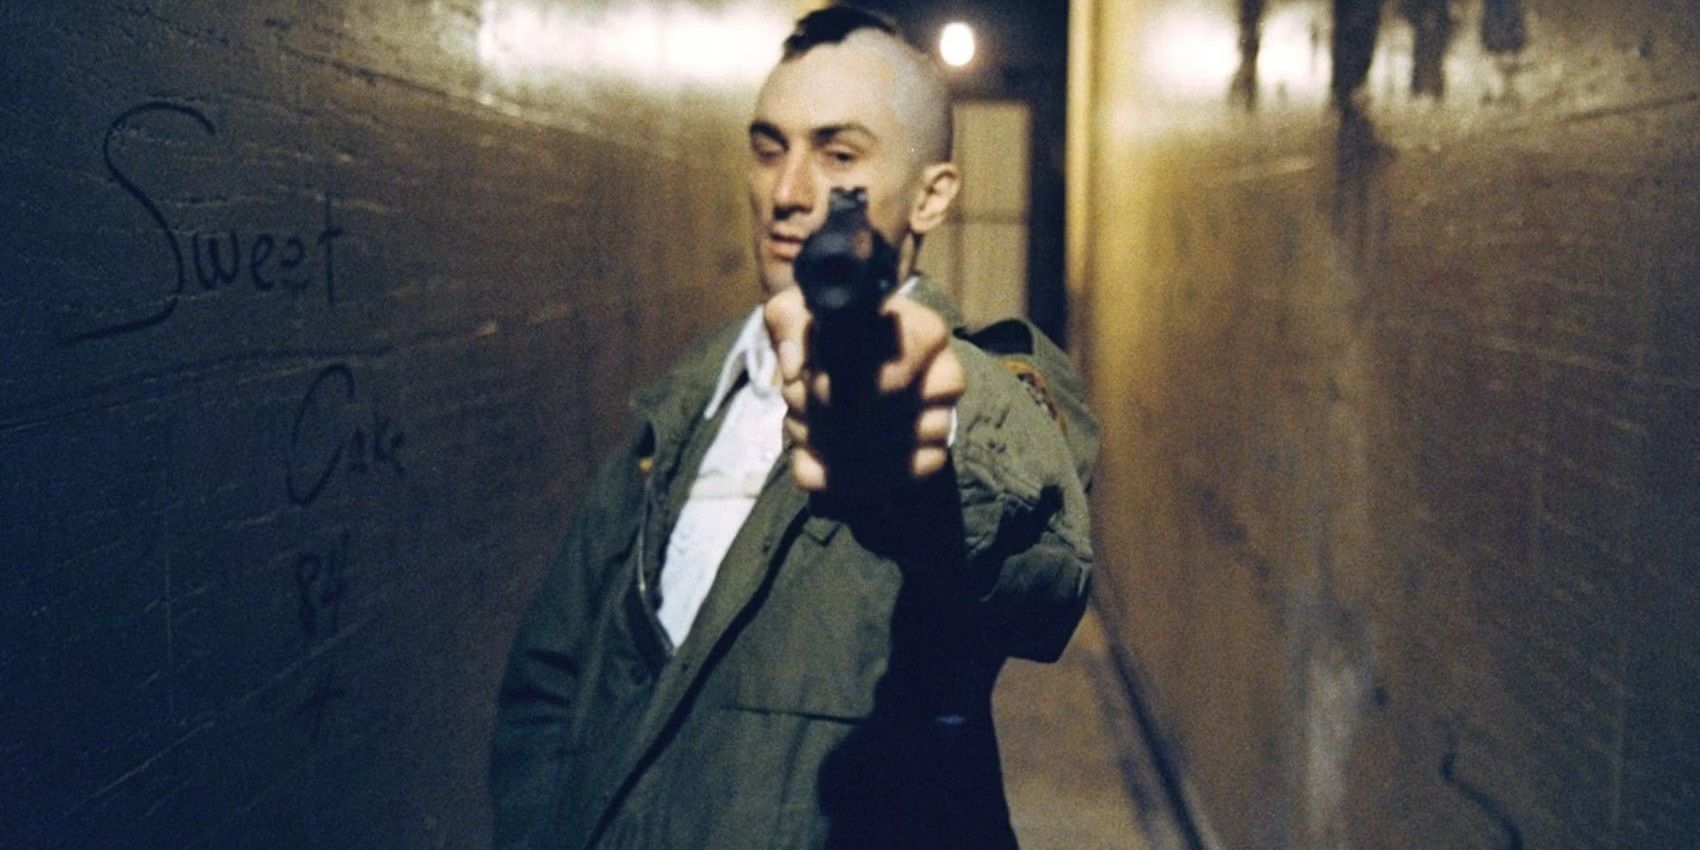 Travis with a gun in Taxi Driver